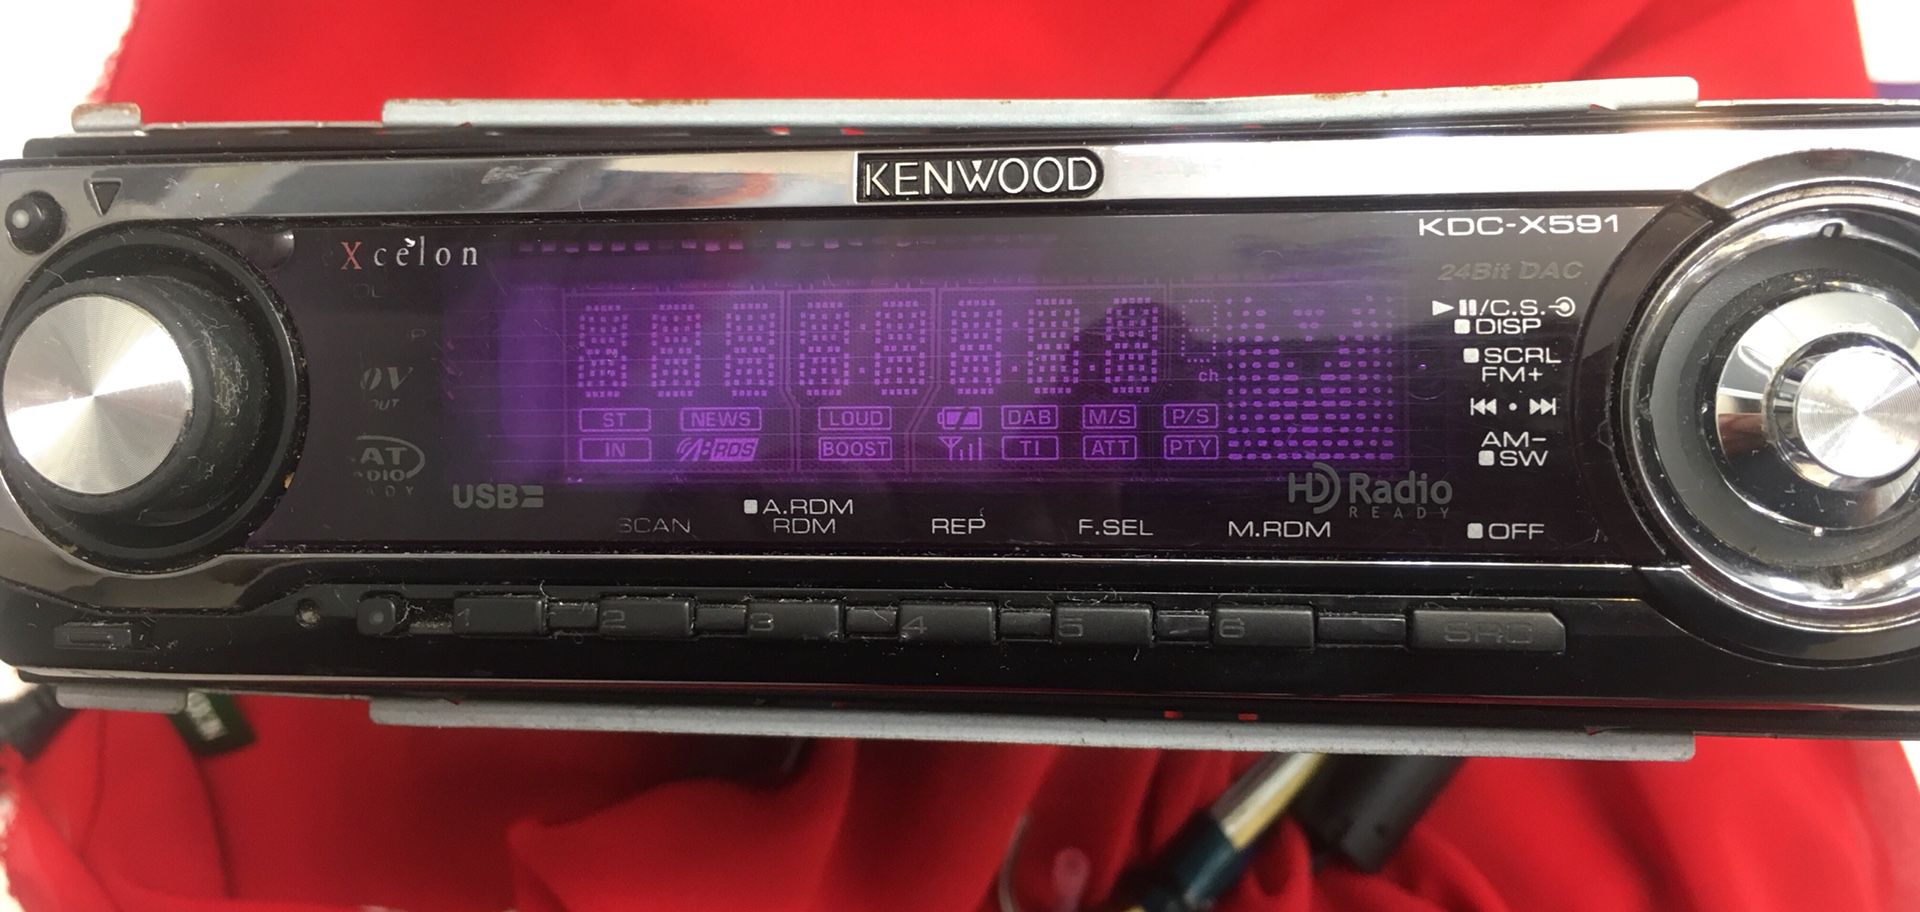 KENWOOD KDC-X591 CD PLAYER CAR STEREO Kenwood In-Dash 1-DIN CD Car Stereo Receiver with Front USB CAR STEREO RADIO DASH READ DISC MP 3. SINSTALLATIO